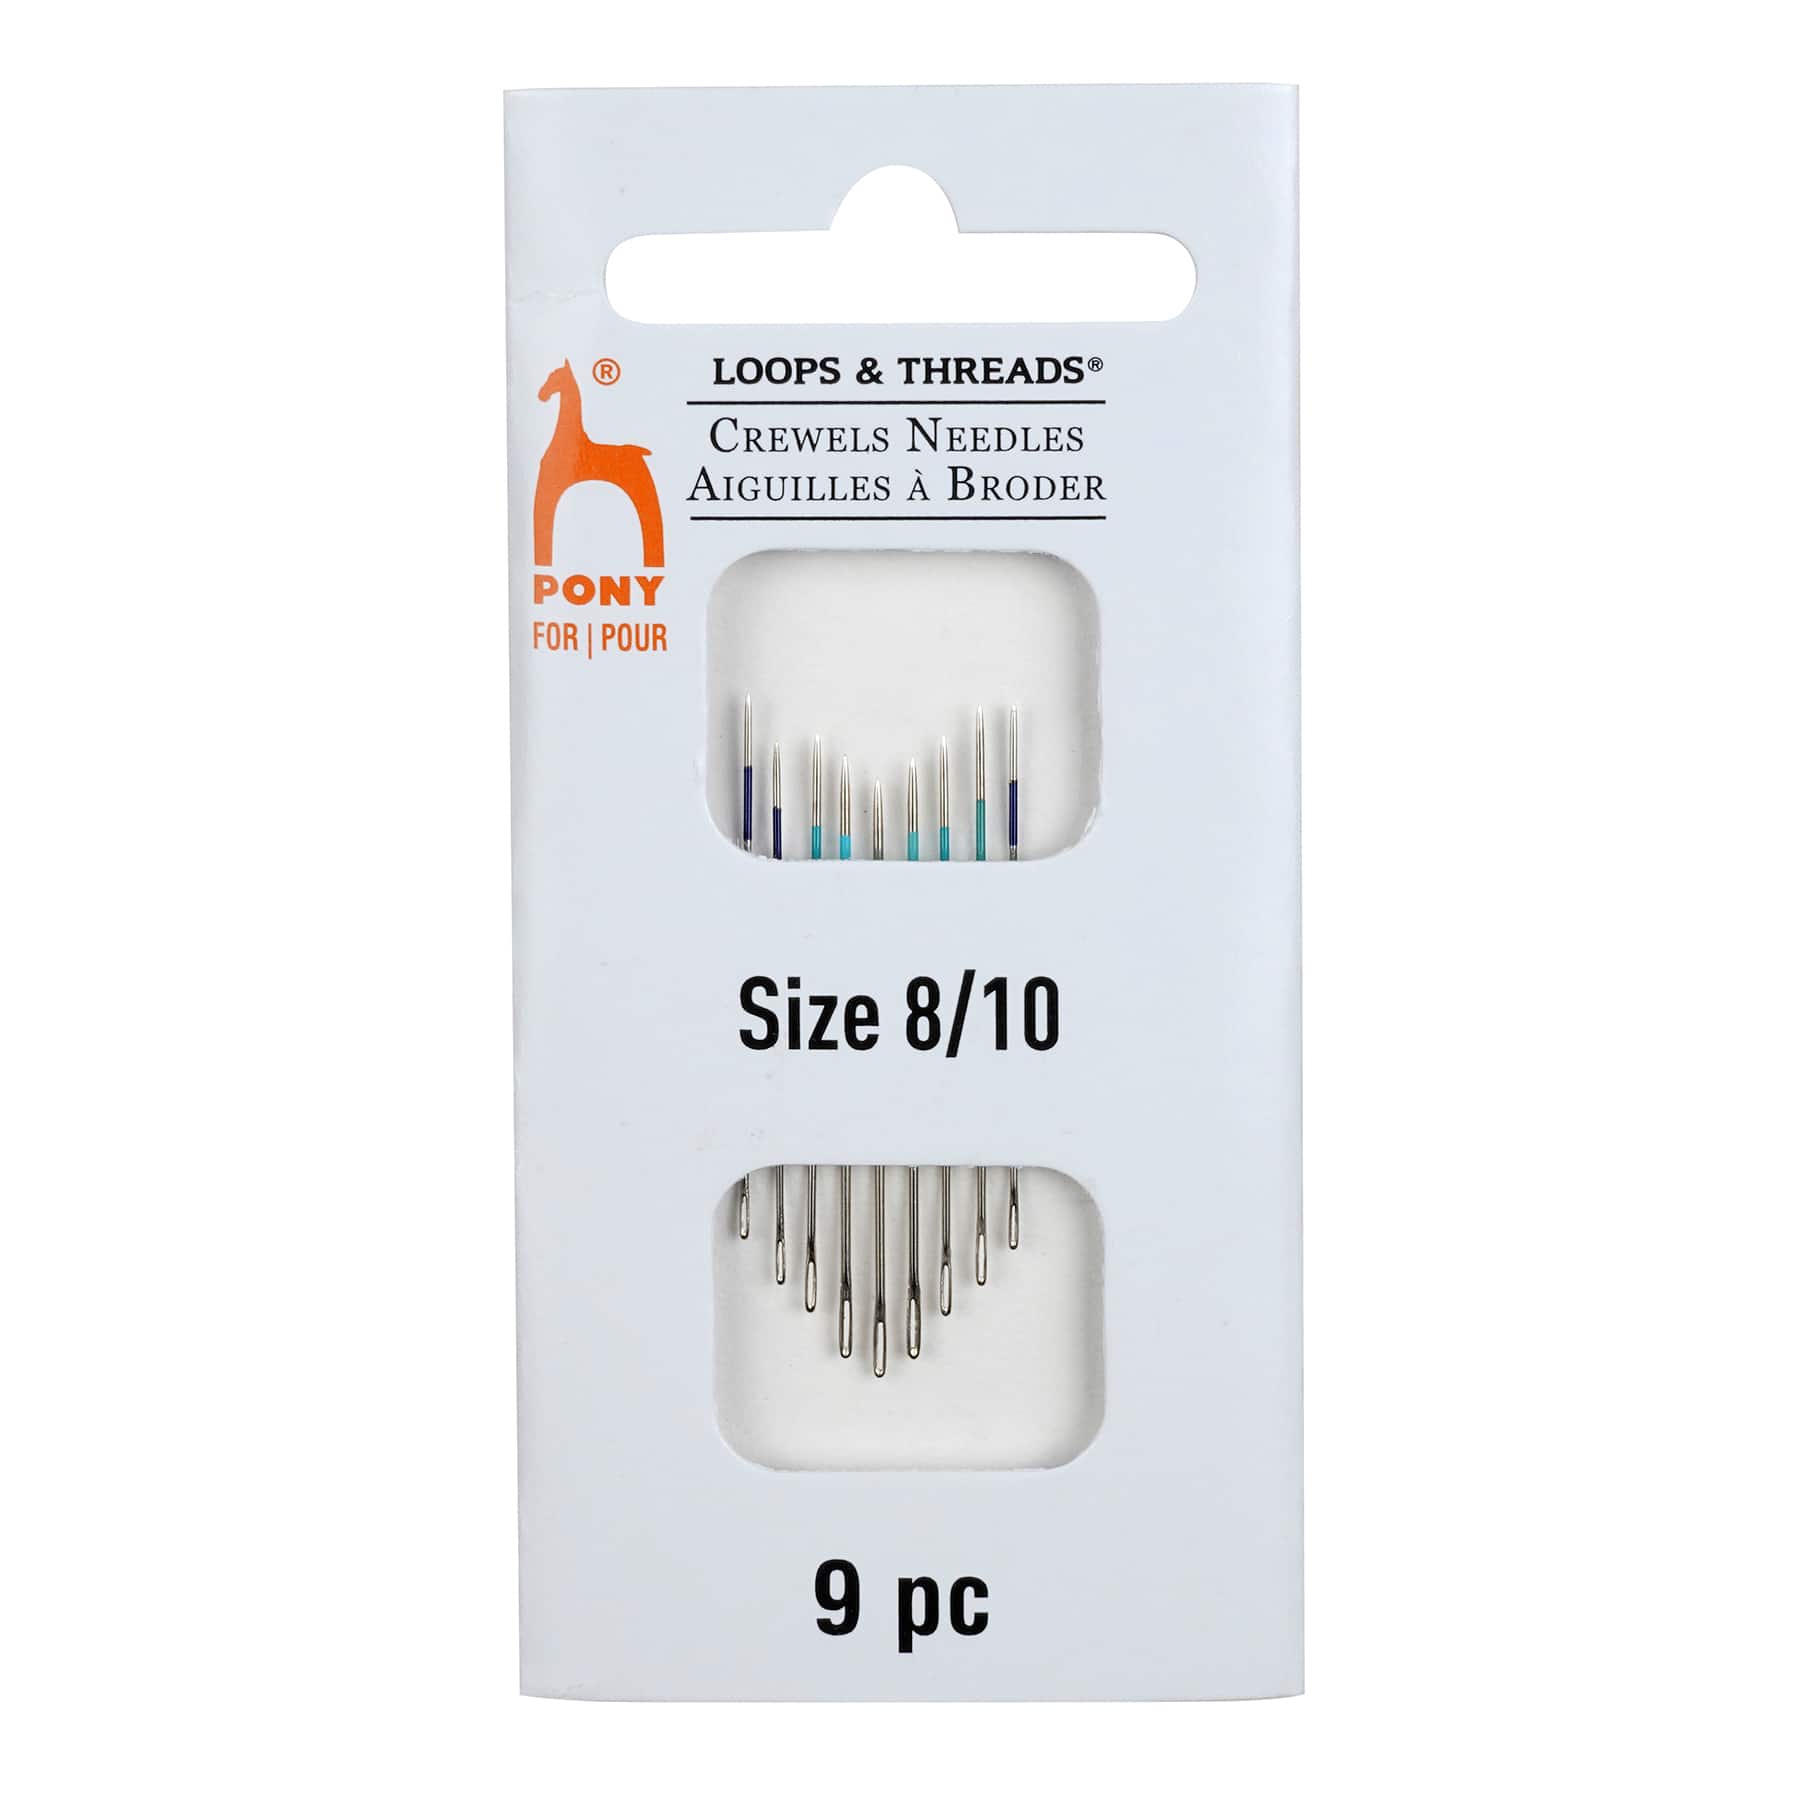 Pony&#xAE; 8/10 Crewels Needles by Loops &#x26; Threads&#xAE;, 9ct.